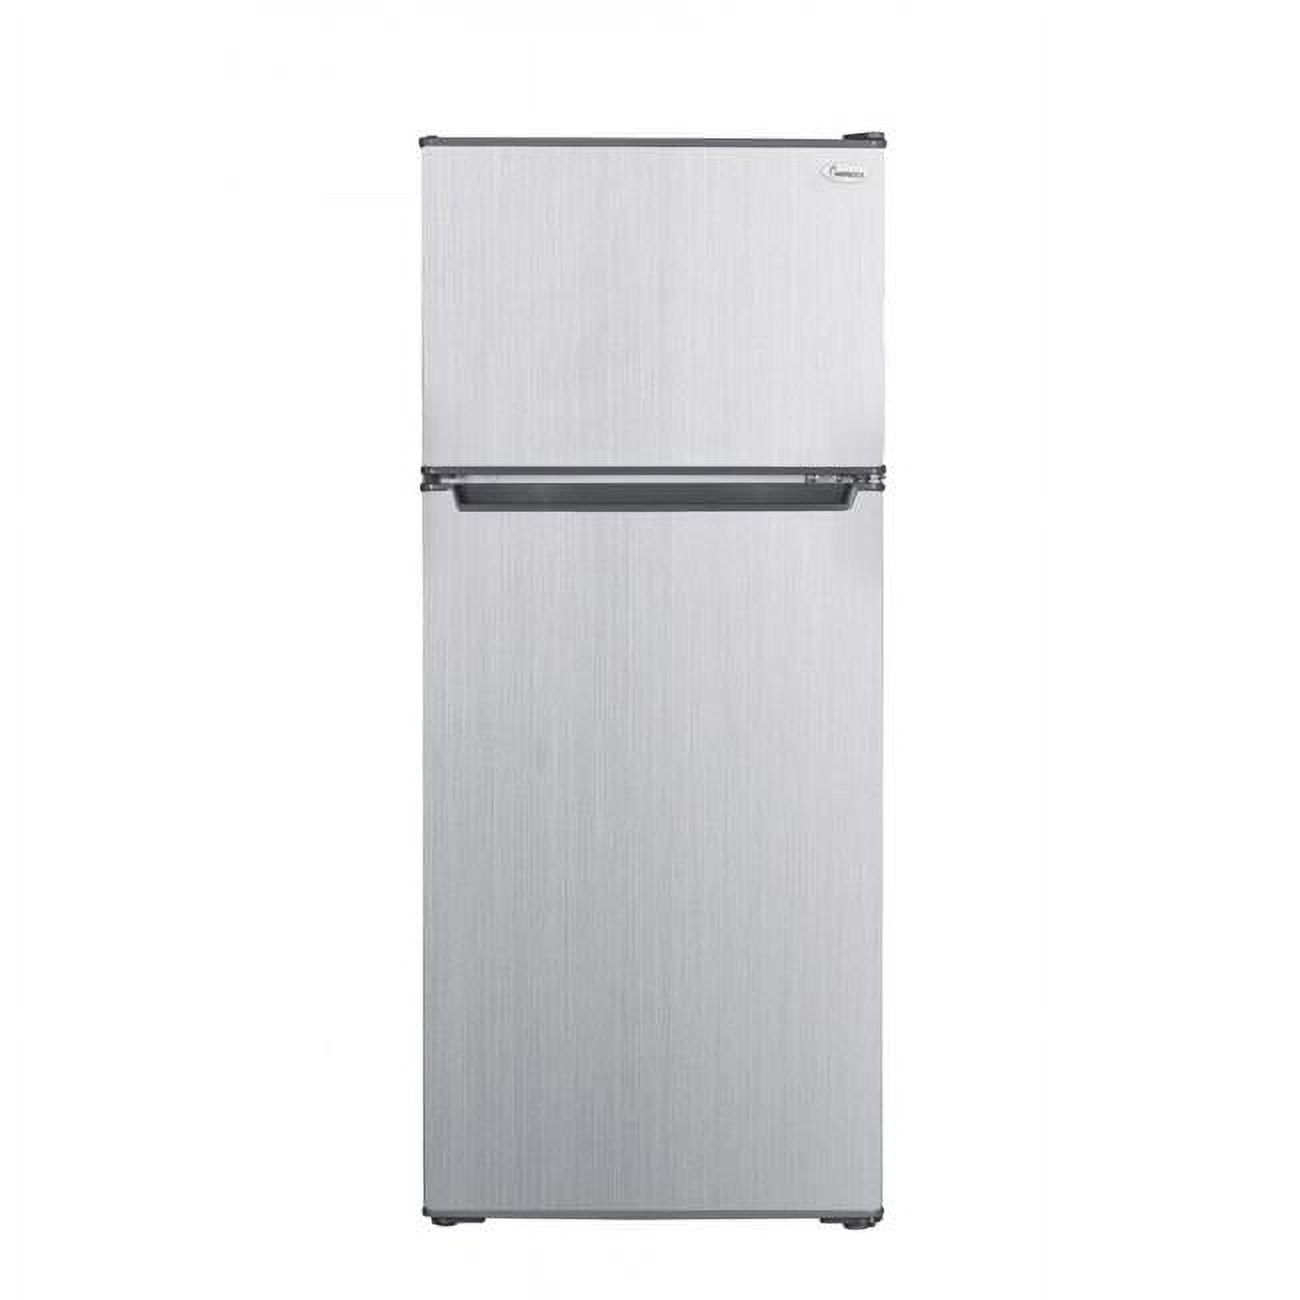 2-Gig RC-2450SLG 4.5 cu. ft. Compact Mini Refrigerator with Top Mount Freezer - image 1 of 5